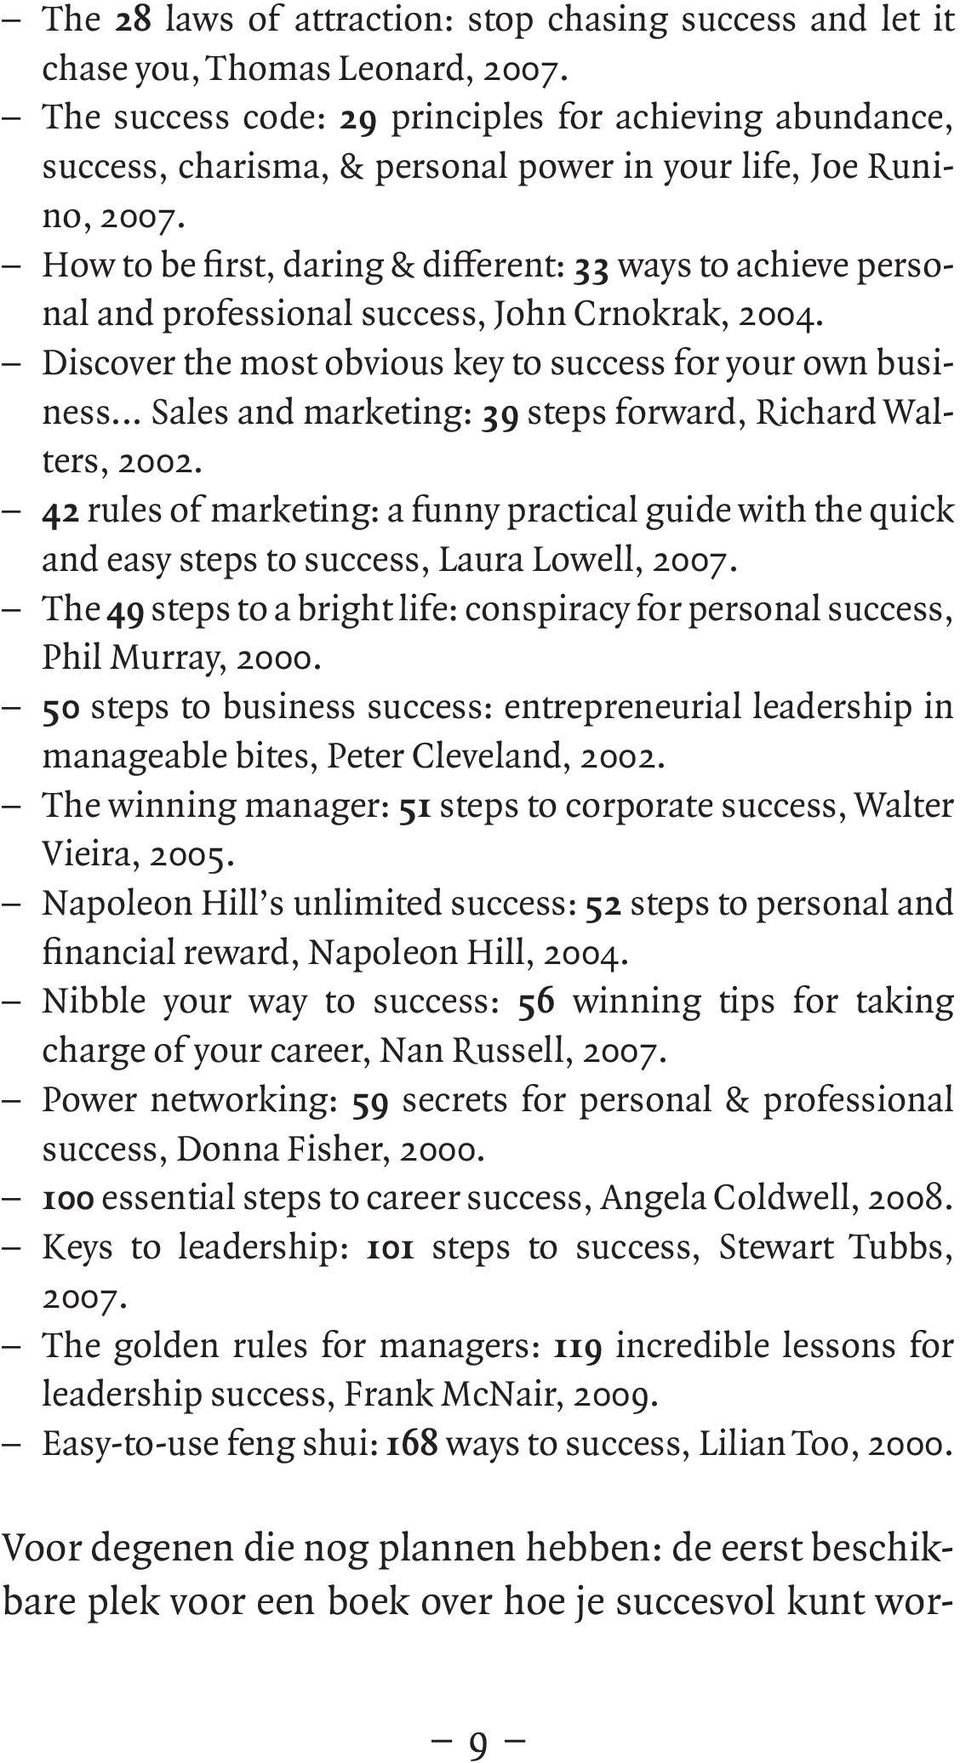 How to be first, daring & different: 33 ways to achieve personal and professional success, John Crnokrak, 2004. Discover the most obvious key to success for your own business.